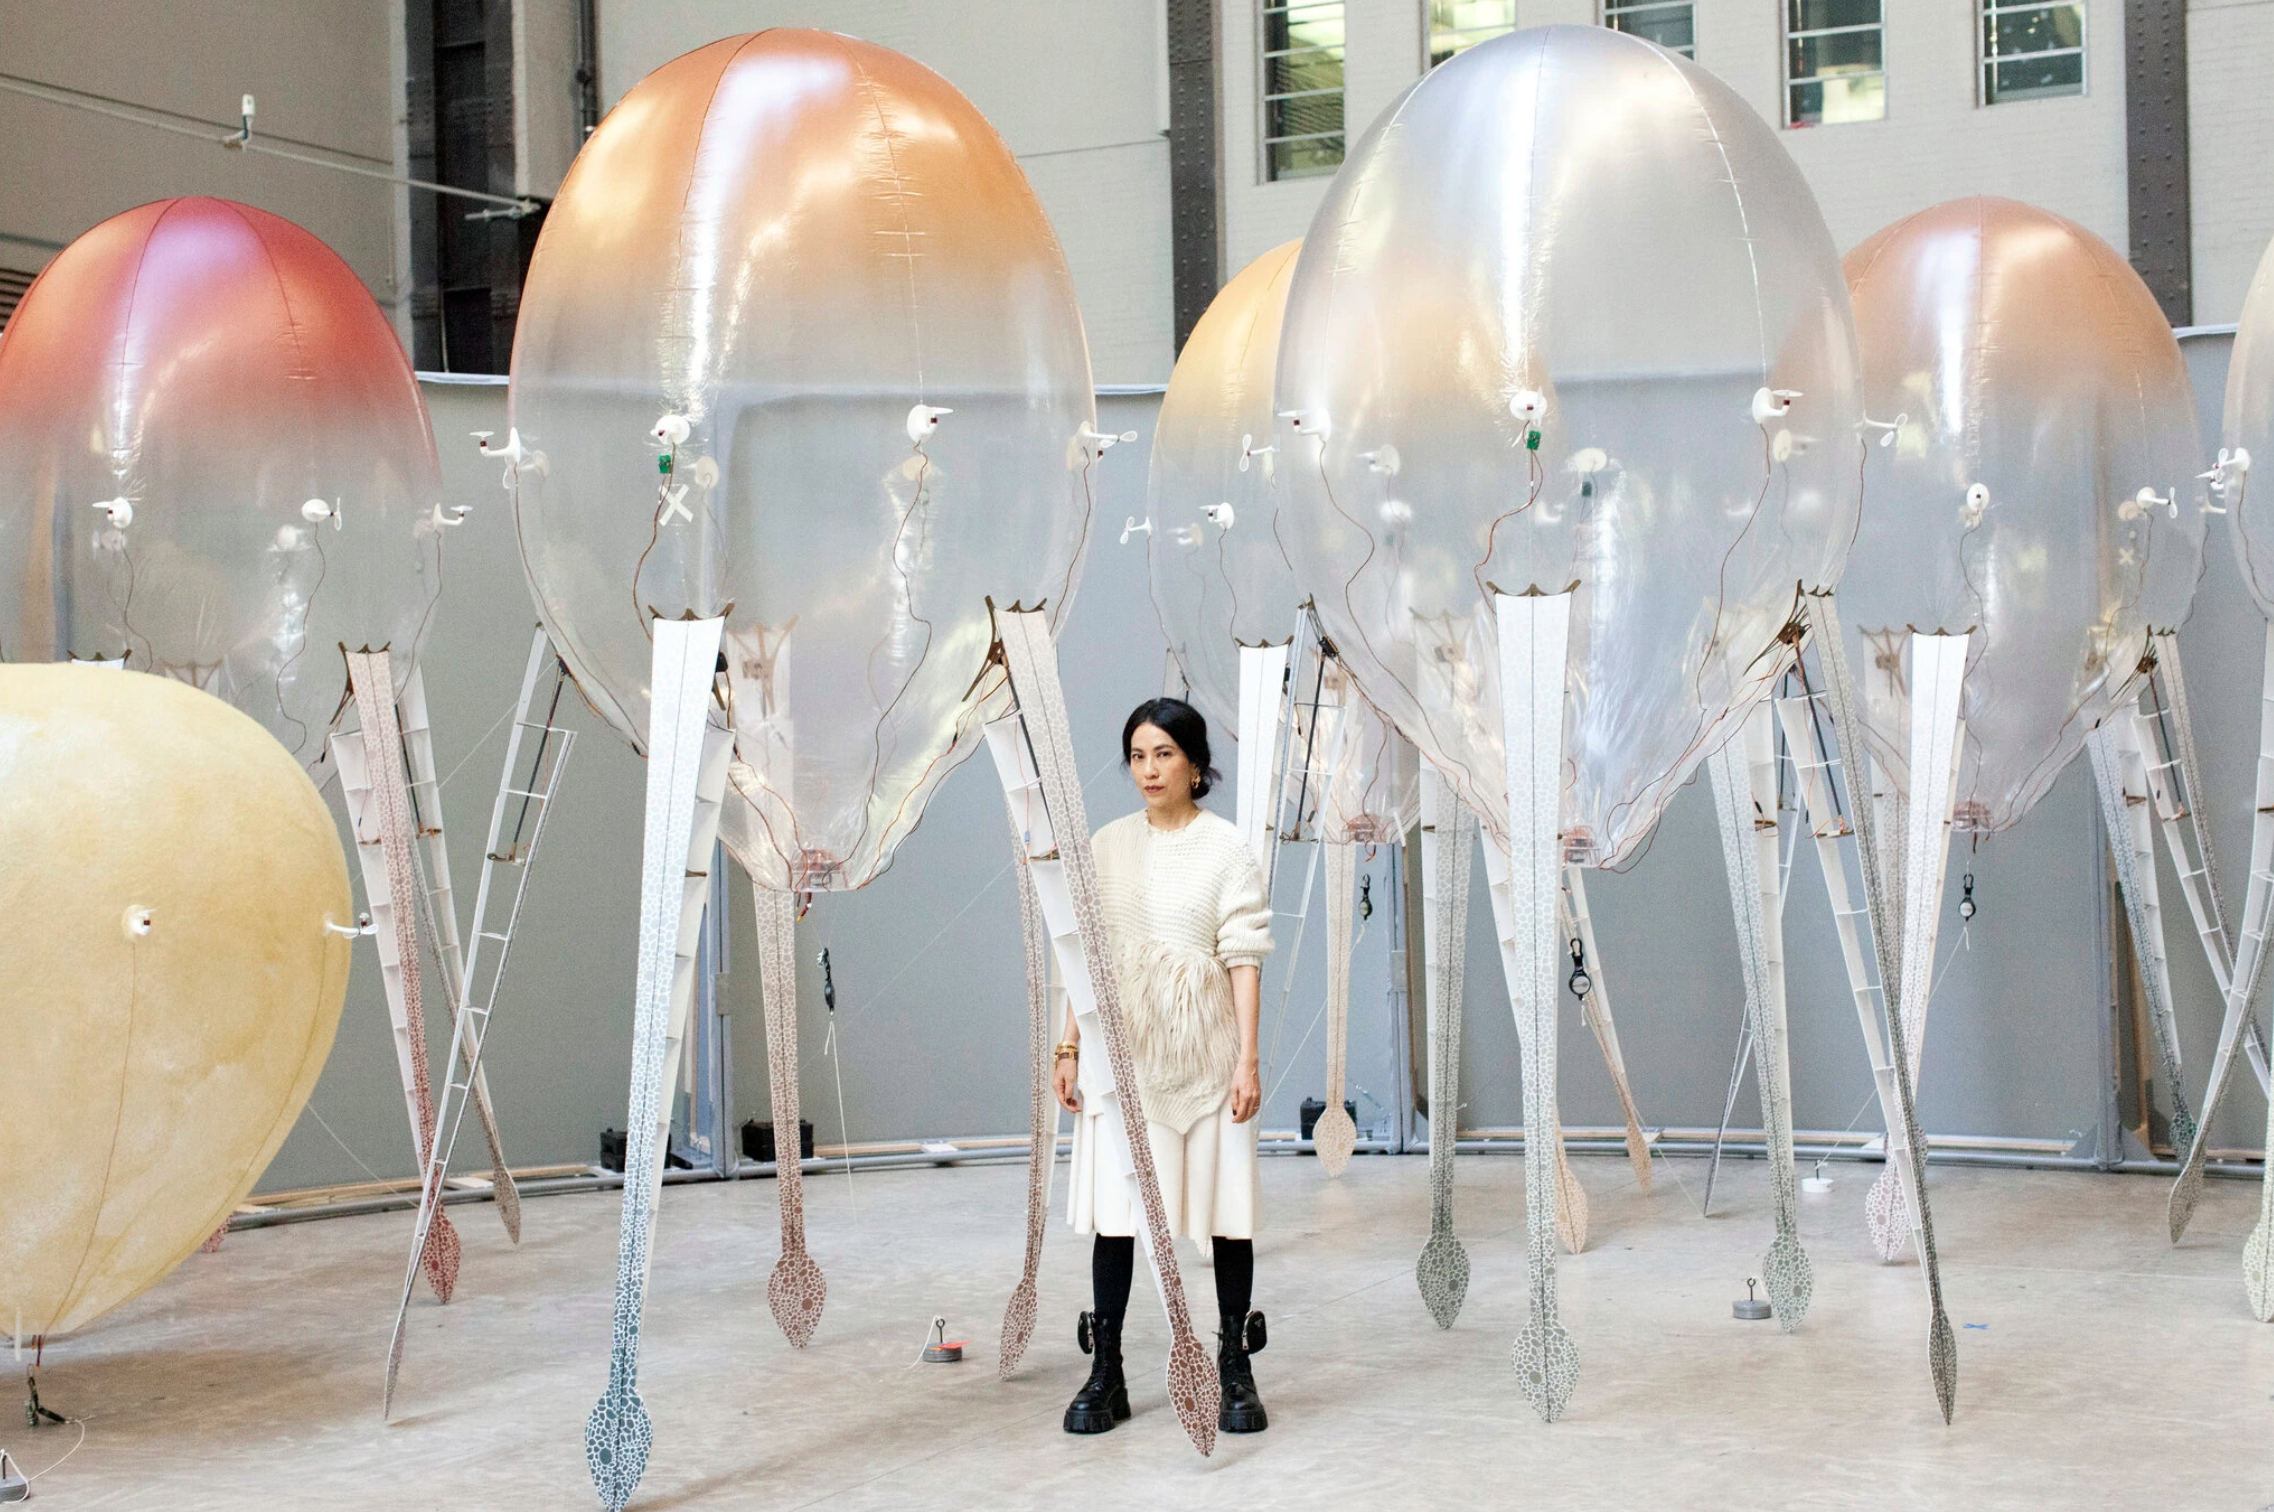 Anicka Yi standing in her new exhibit with “biologized machines”